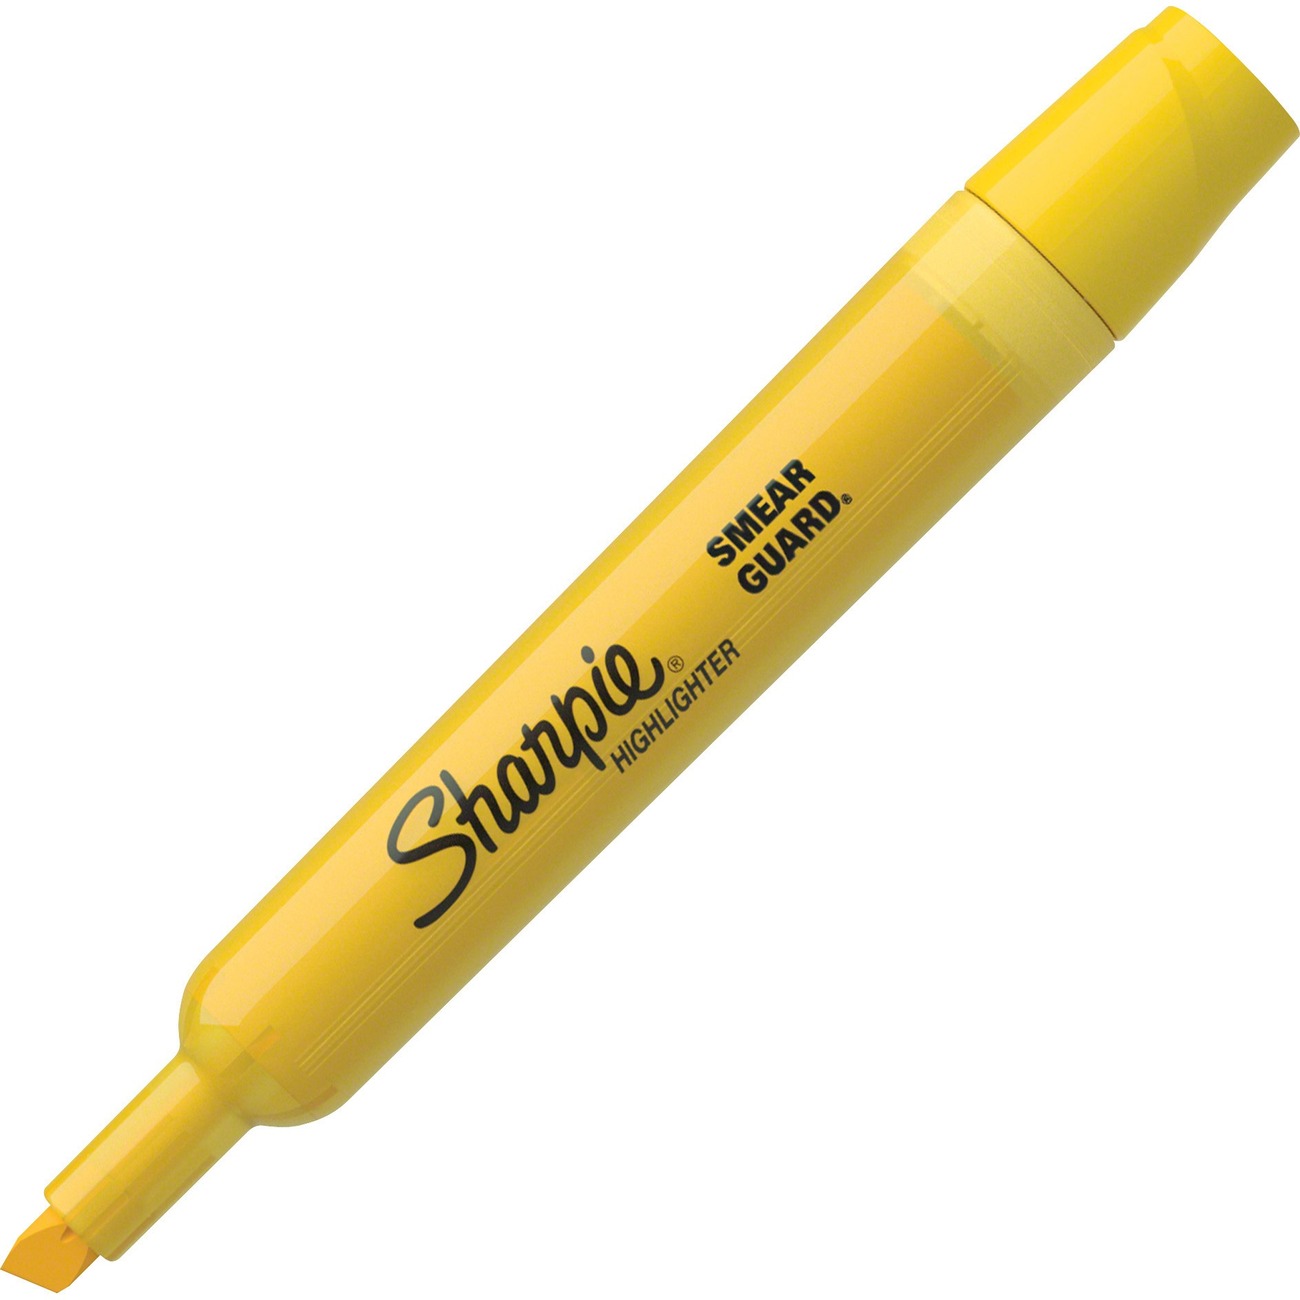 Sharpie Highlighters, Stick, Clear View, Yellow - 2 highlighters